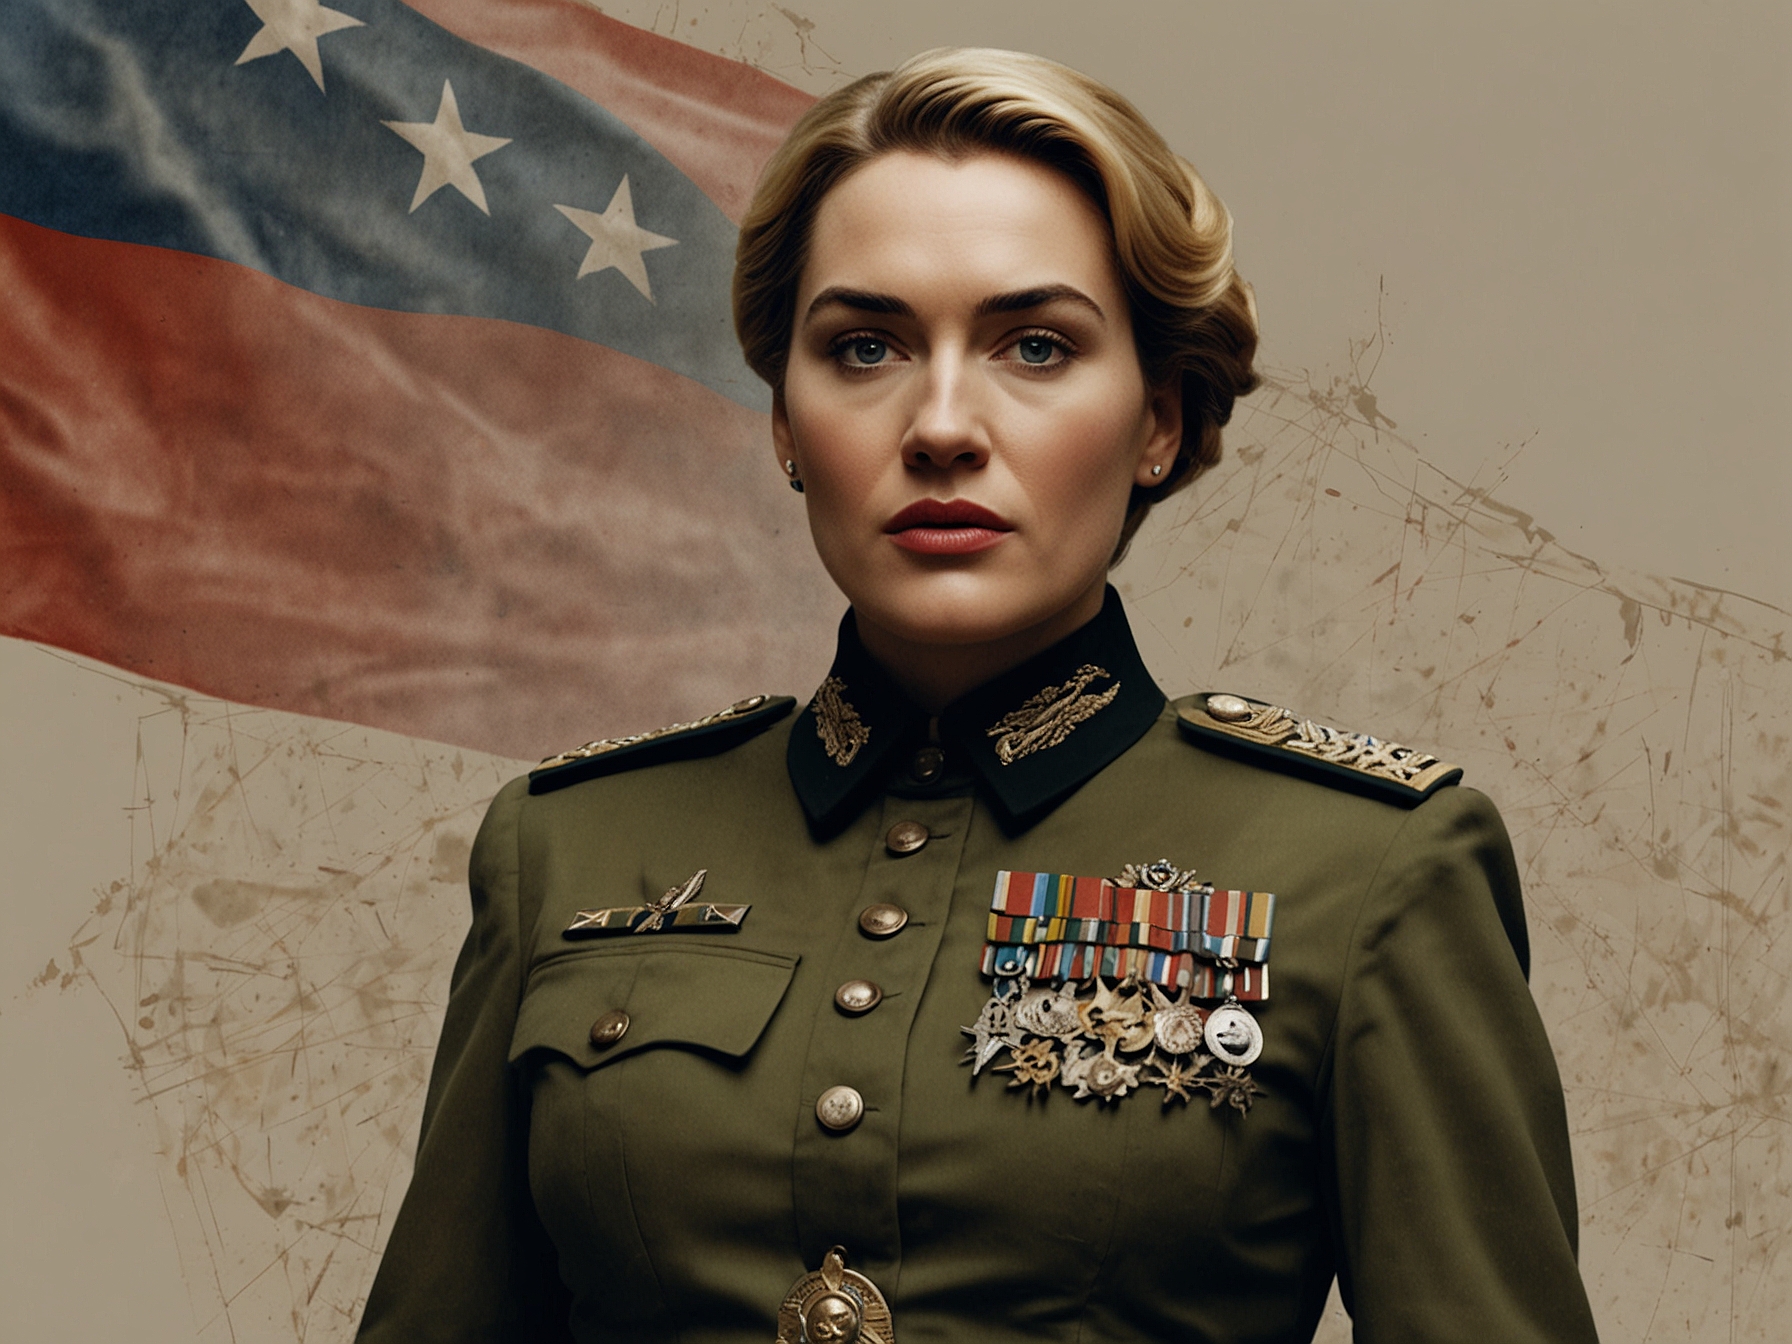 Kate Winslet in character as the absurd dictator in 'The Regime', dressed in an extravagant military uniform, embodying both the humor and horror inherent in her portrayal of authoritarianism.